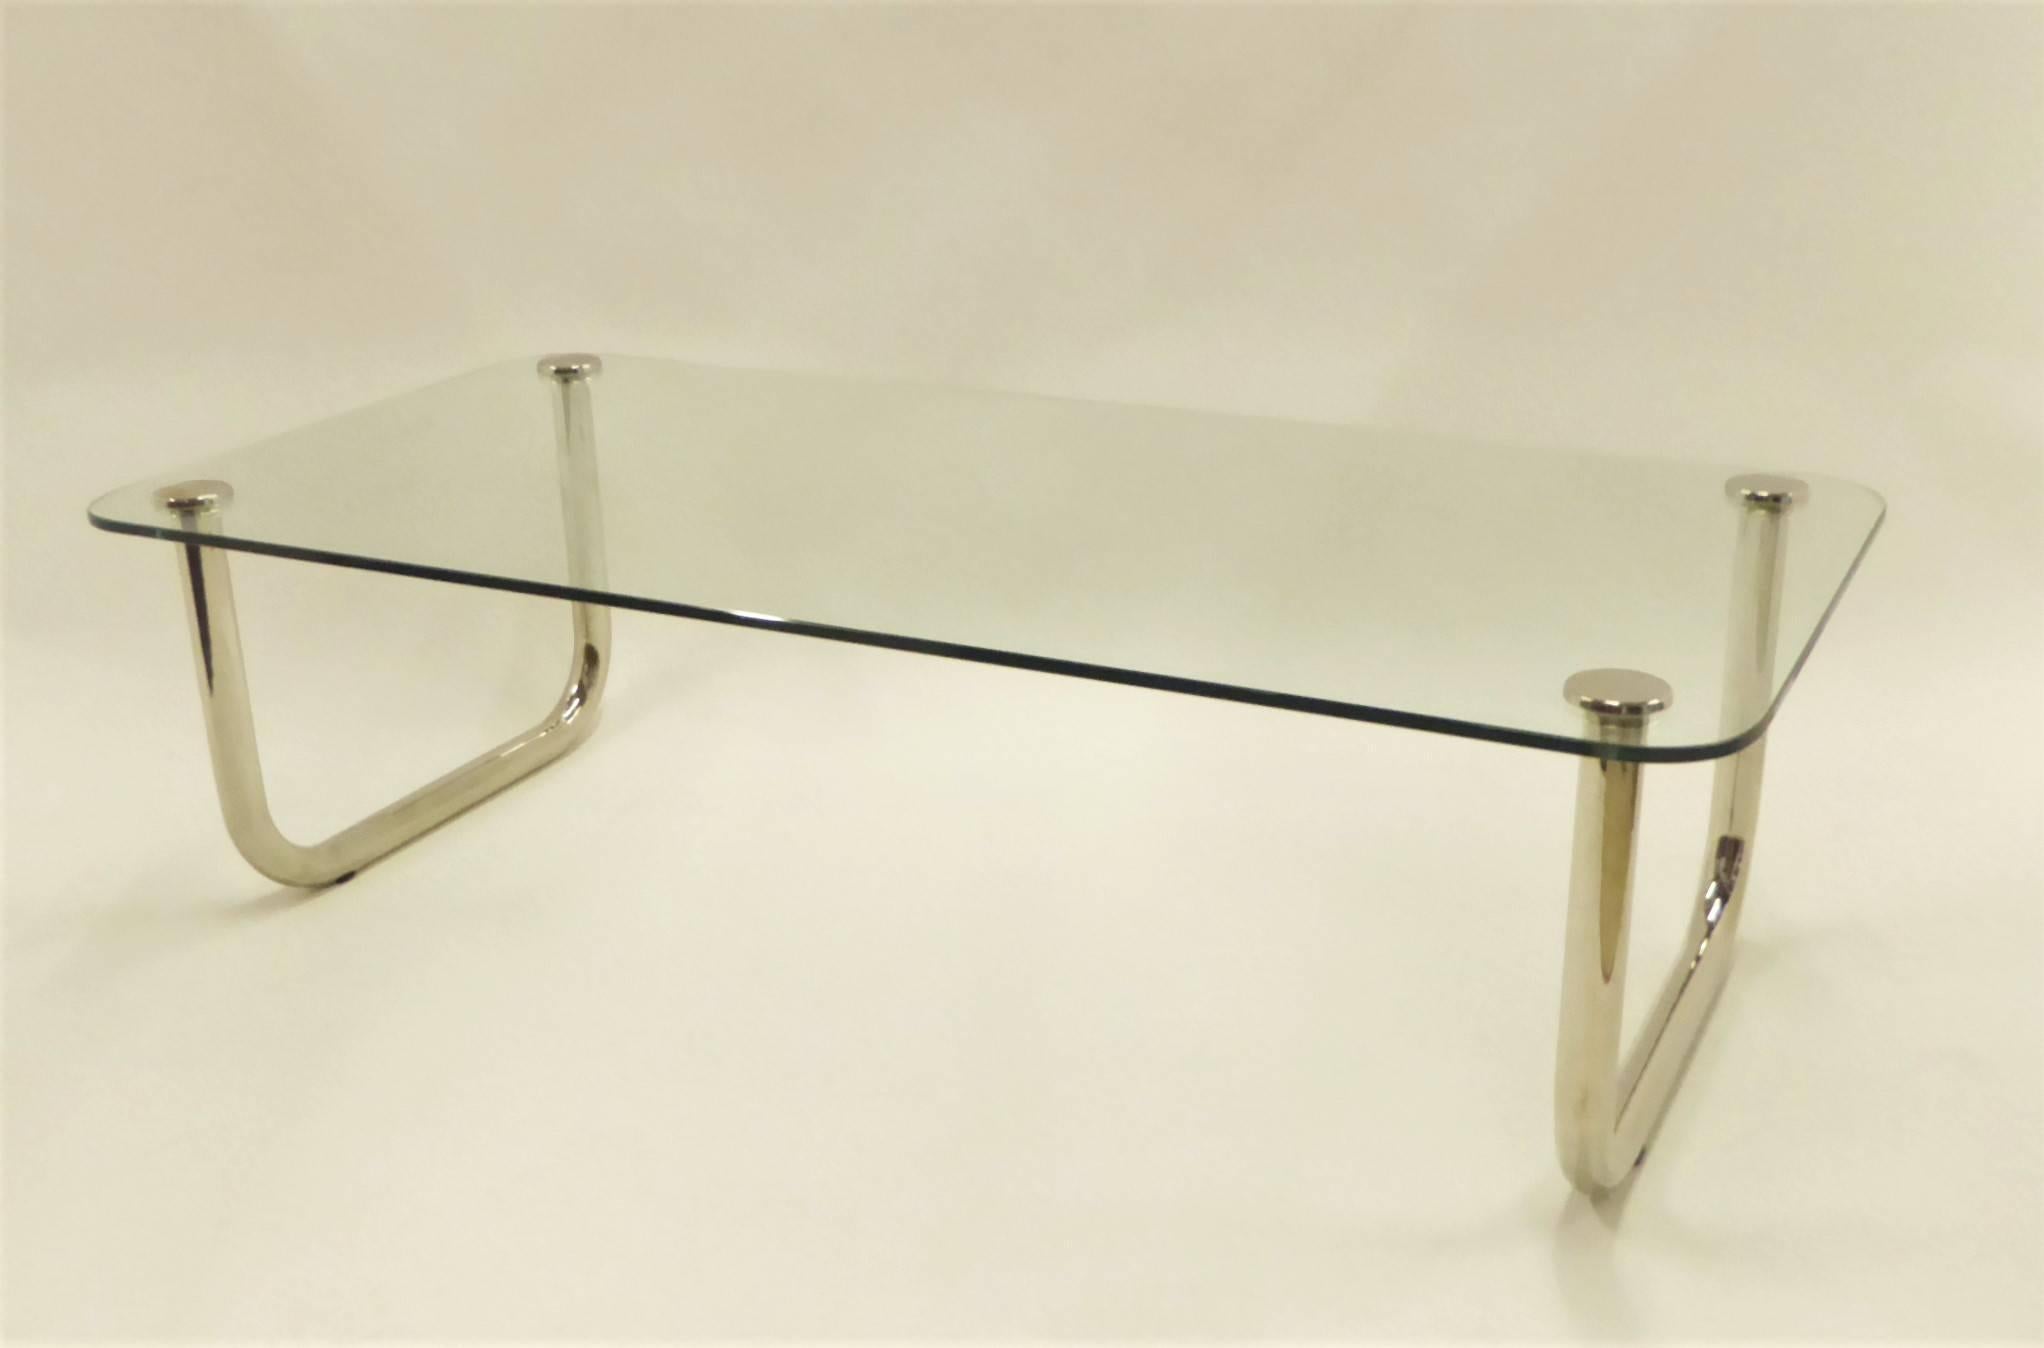 Great scale and fat tubular legs in the style of John Mascheroni with curving nickelled sled legs highlight this rarely seen late 1960s coffee cocktail table with a floating 1/2 inch glass top. Legs re-nickelled, new glass. Fabulous